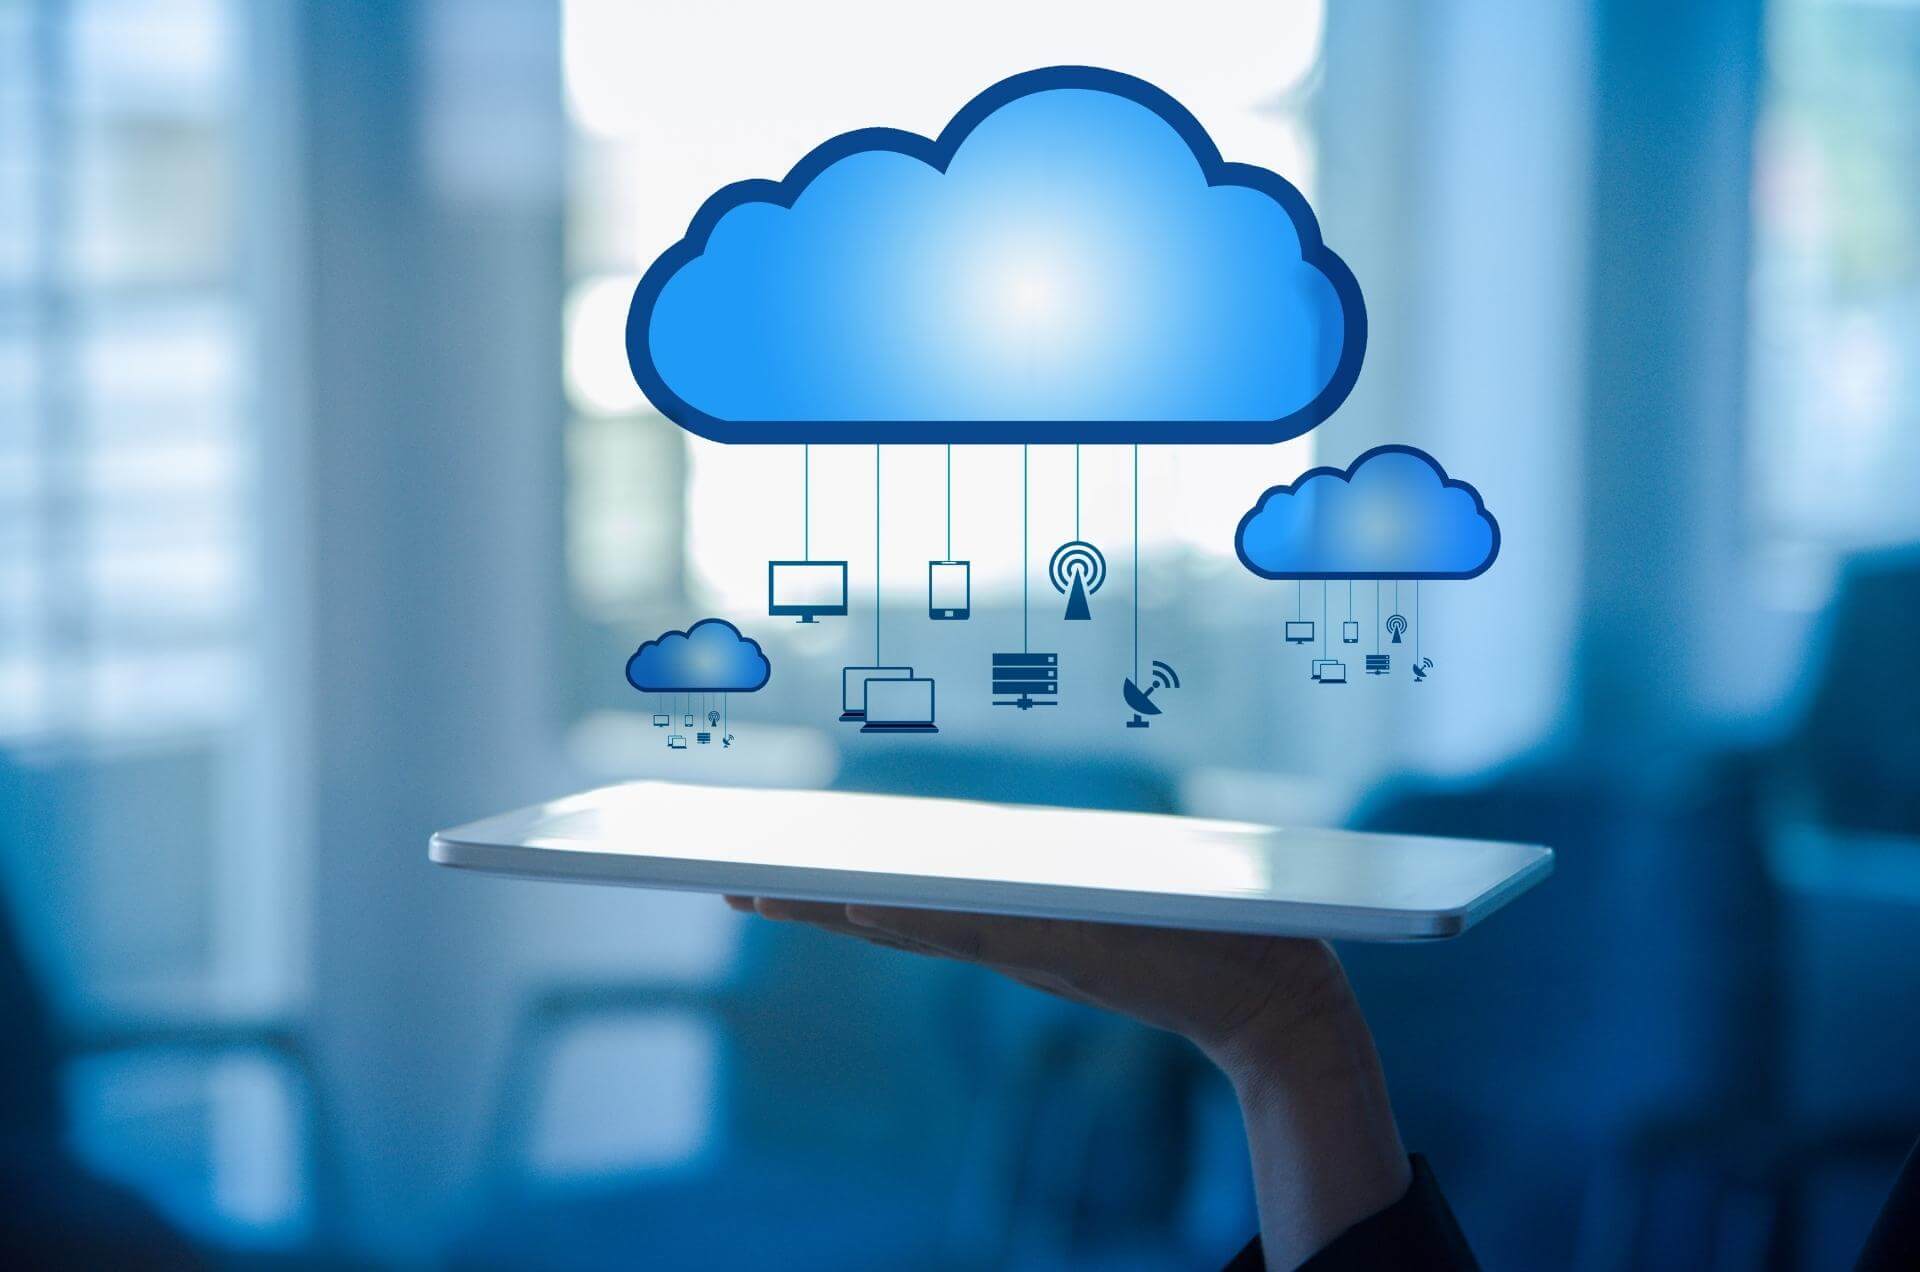 As the name implies, cloud computing is the delivery of various computing services on demand to various servers over the internet.